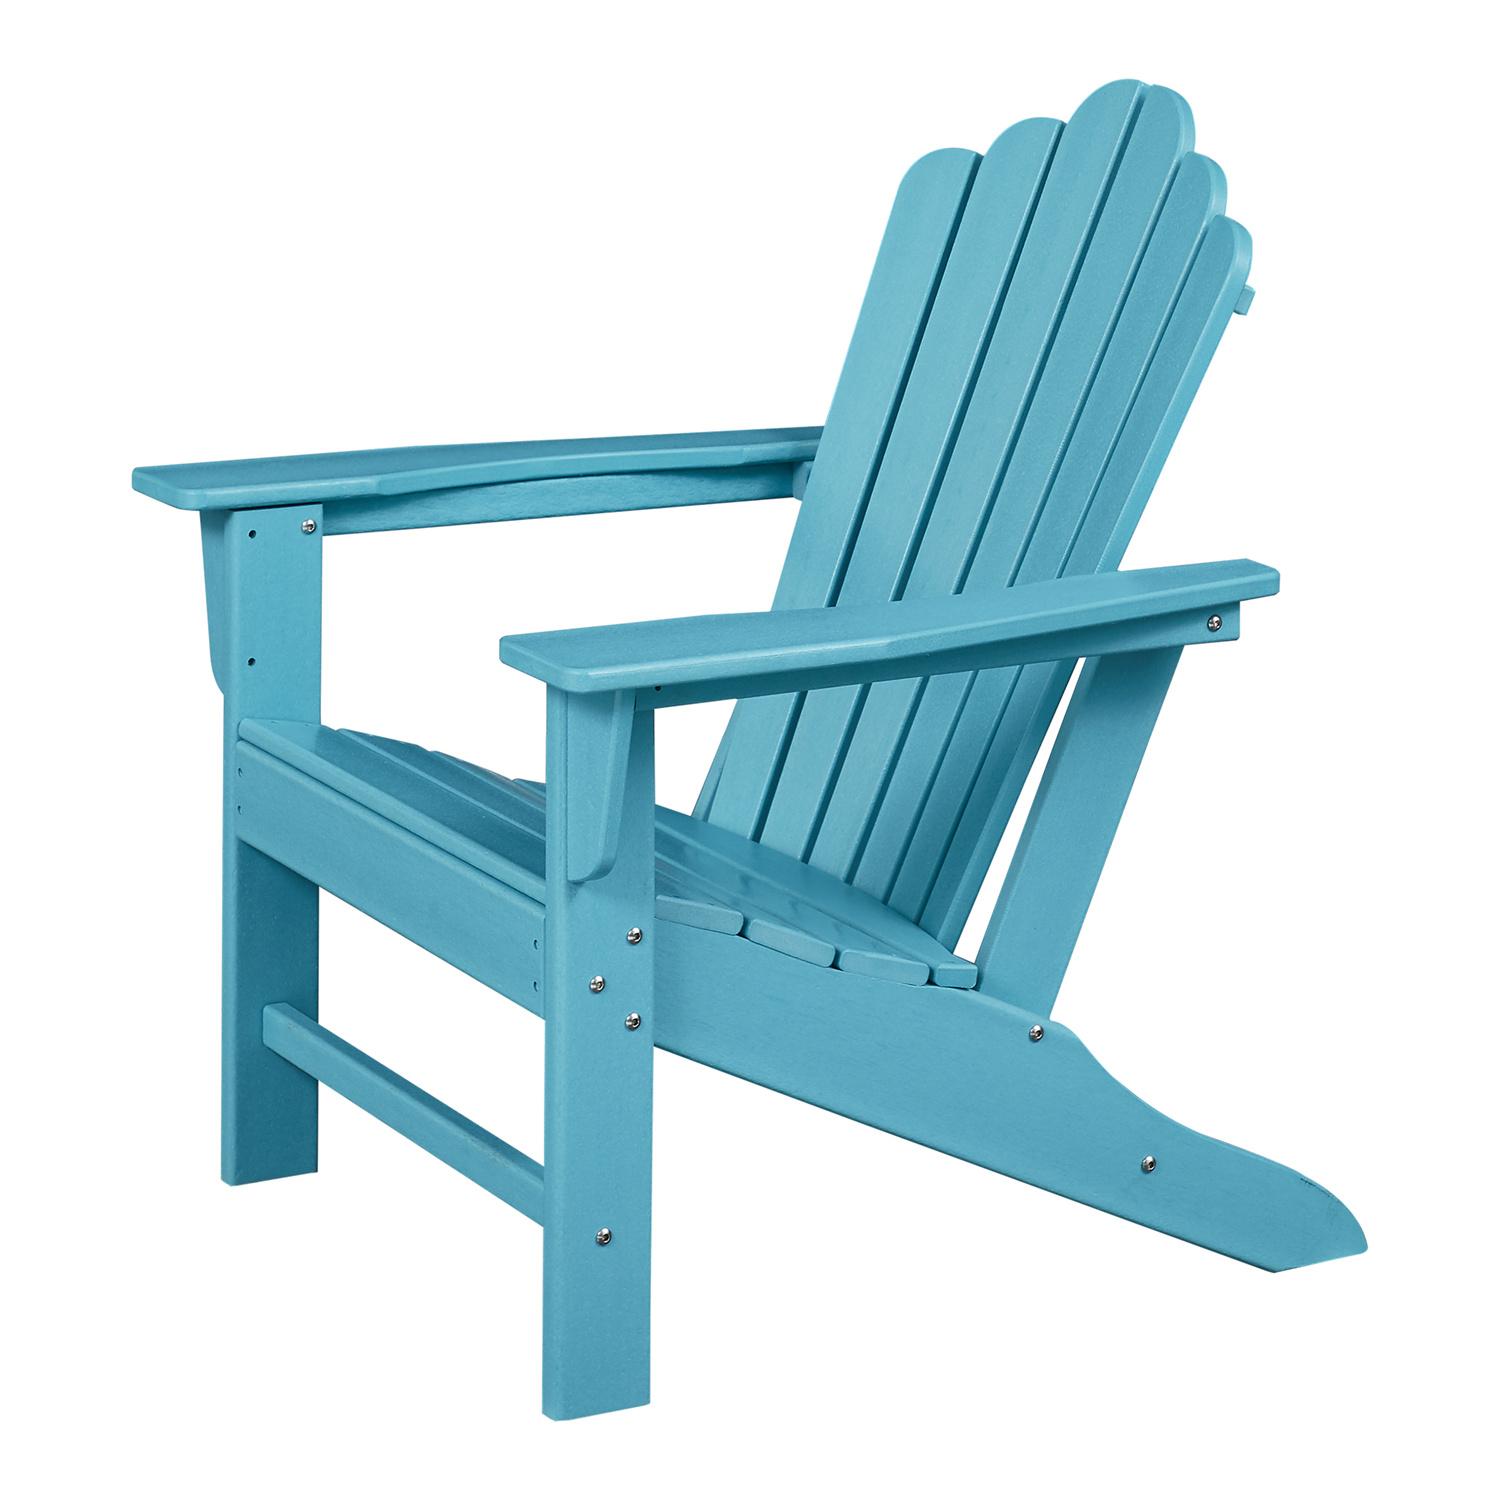 Adirondack Chair Patio Chairs Lawn Chair Outdoor Chairs Painted Chair Weather Resistant for Patio Deck Garden, Backyard Deck, Fire Pit & Lawn Furniture Porch and Lawn Seating- Blue - image 2 of 7